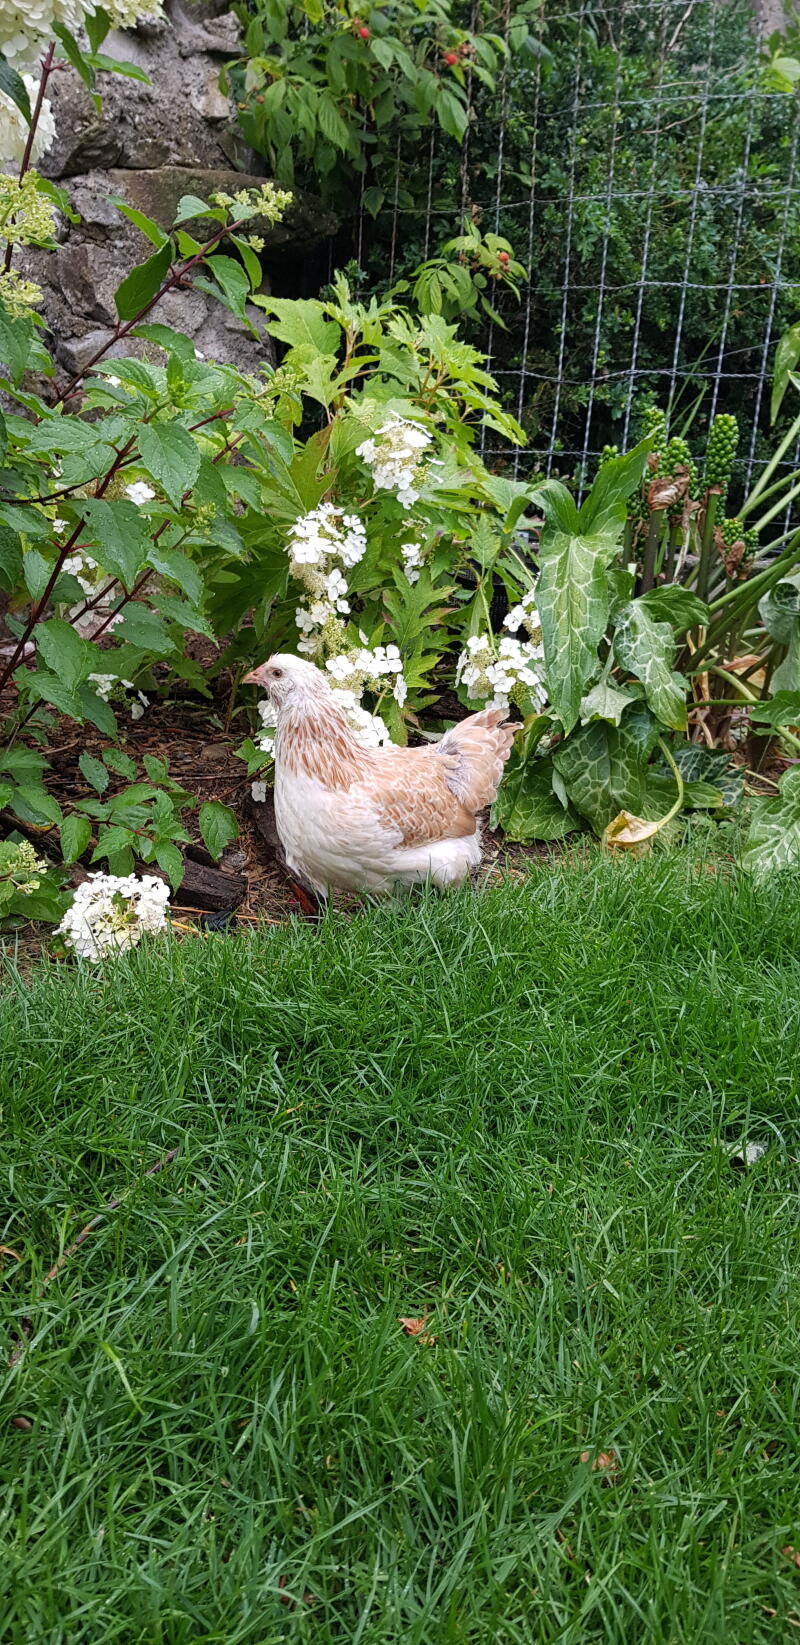 A white and brown chicken in a garden behind netting